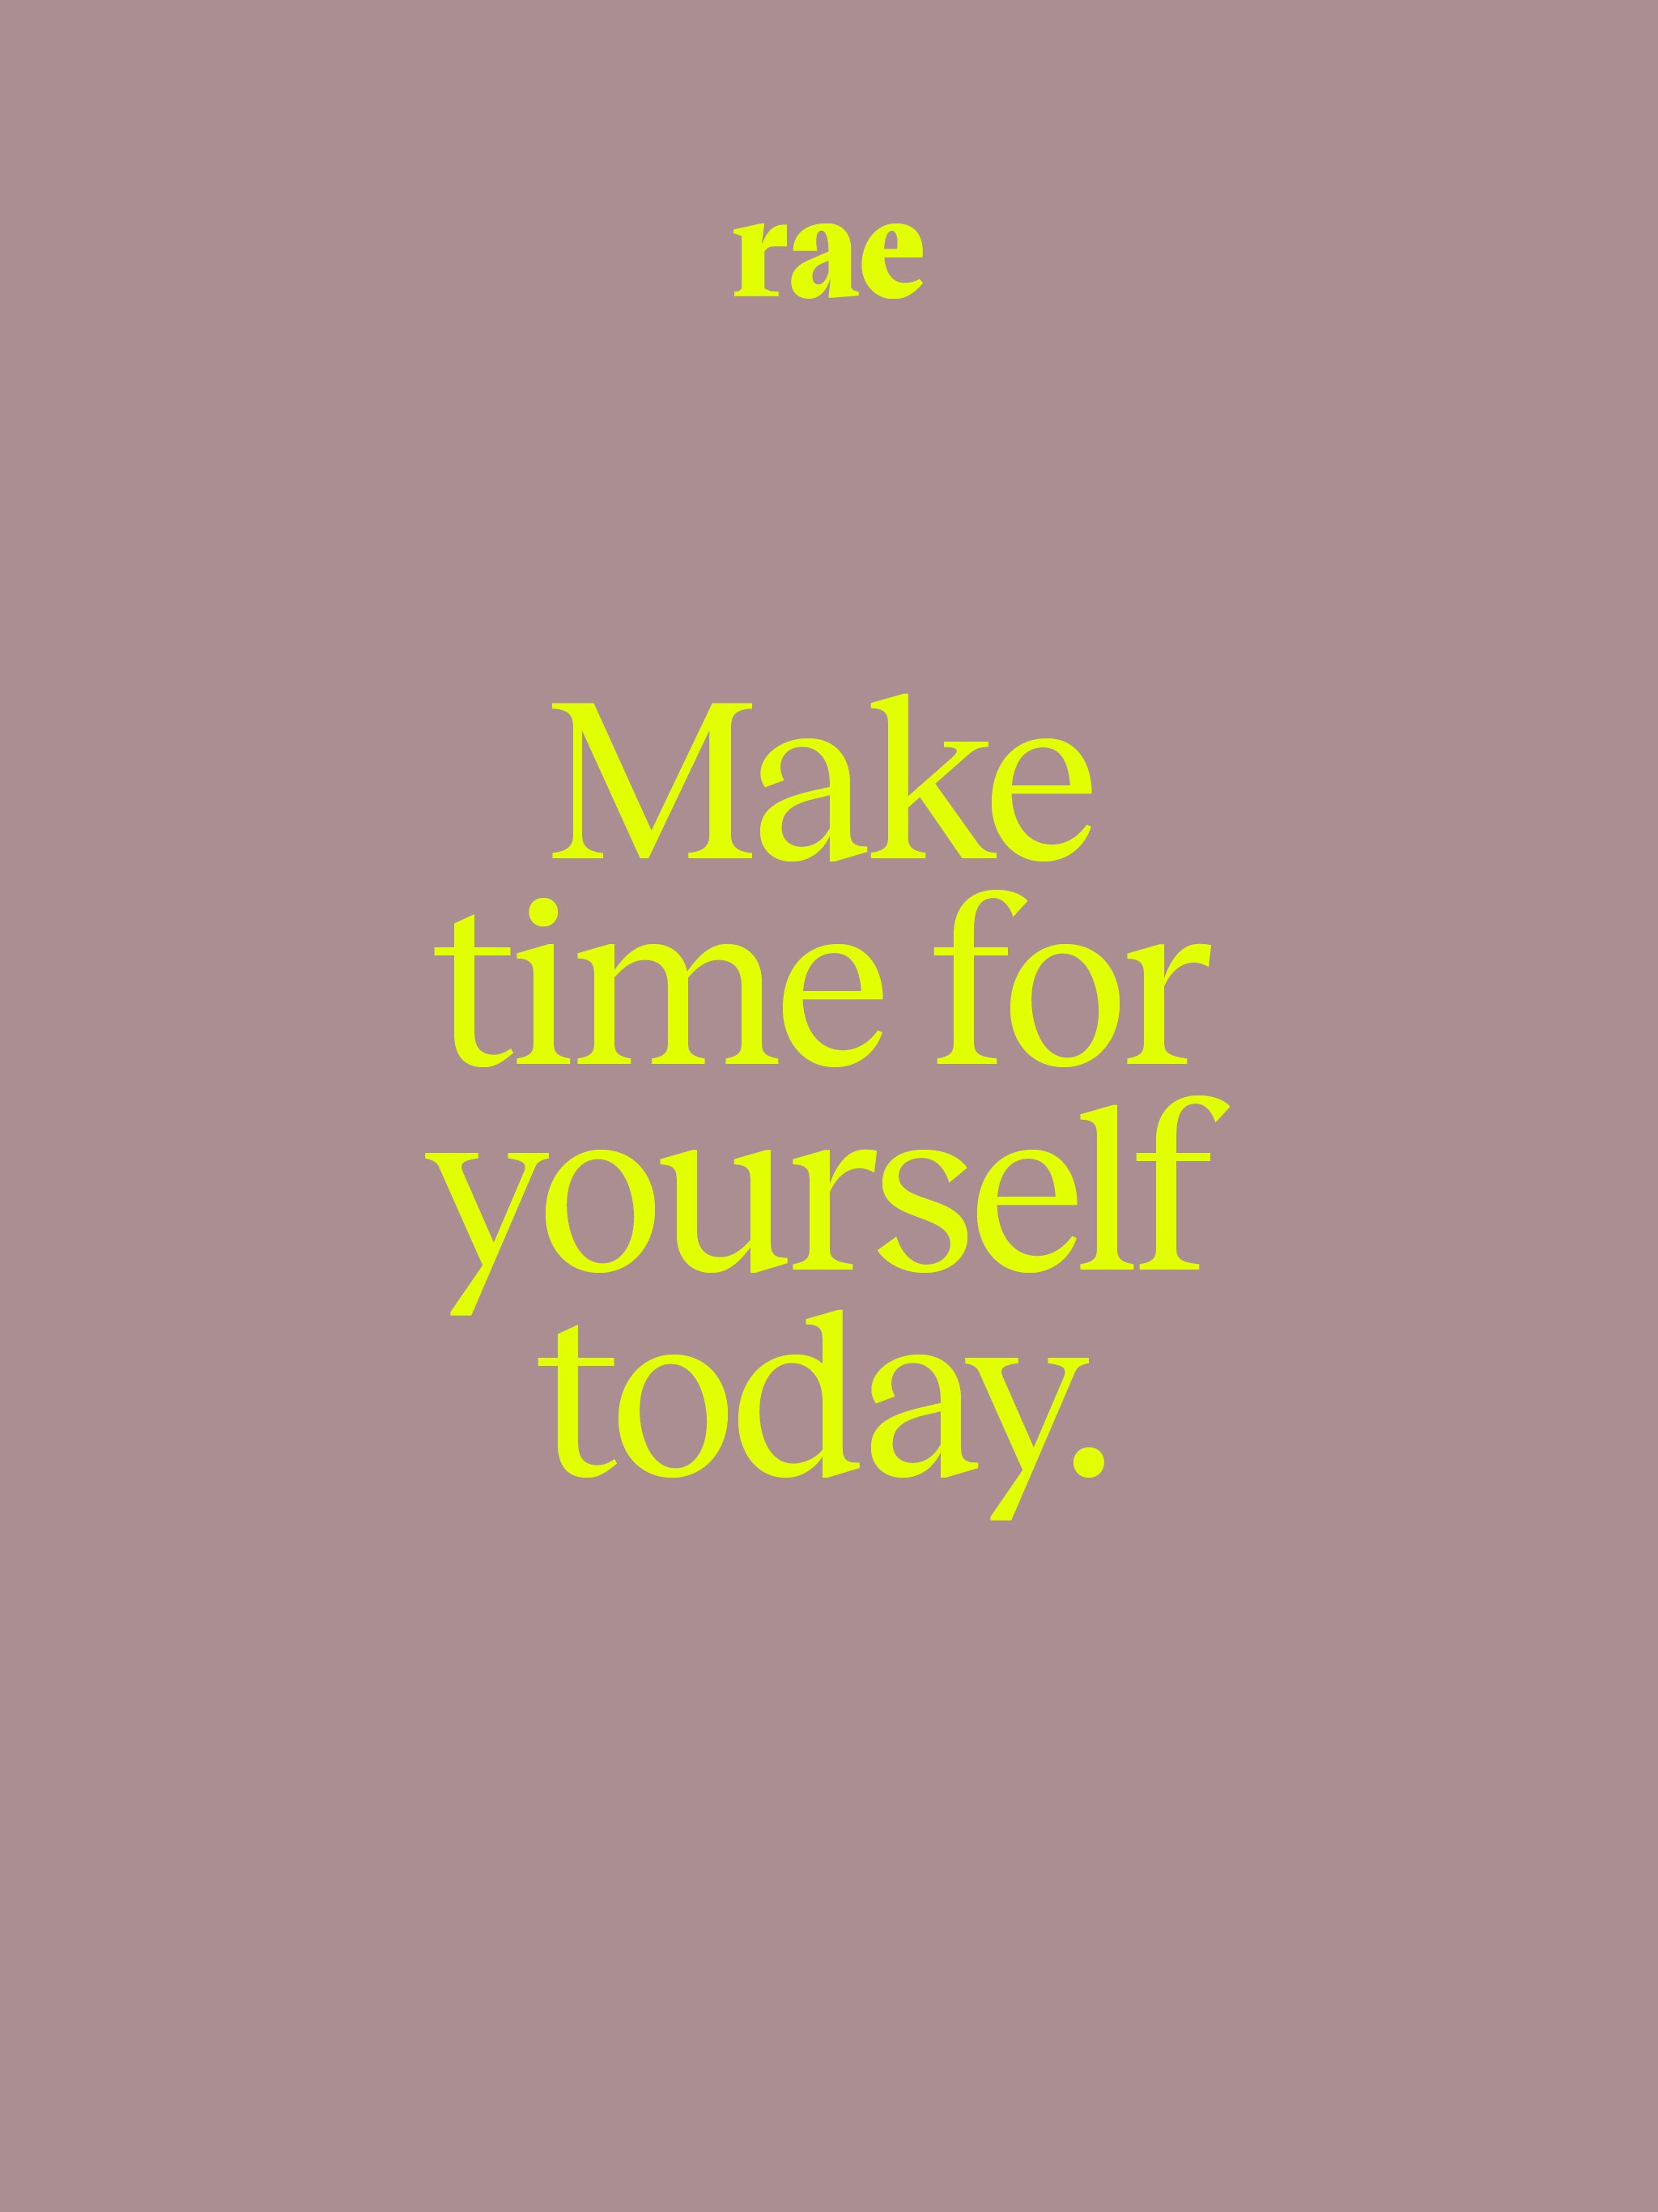 Make time for yourself today_Tablet_Screensavers_2.jpg